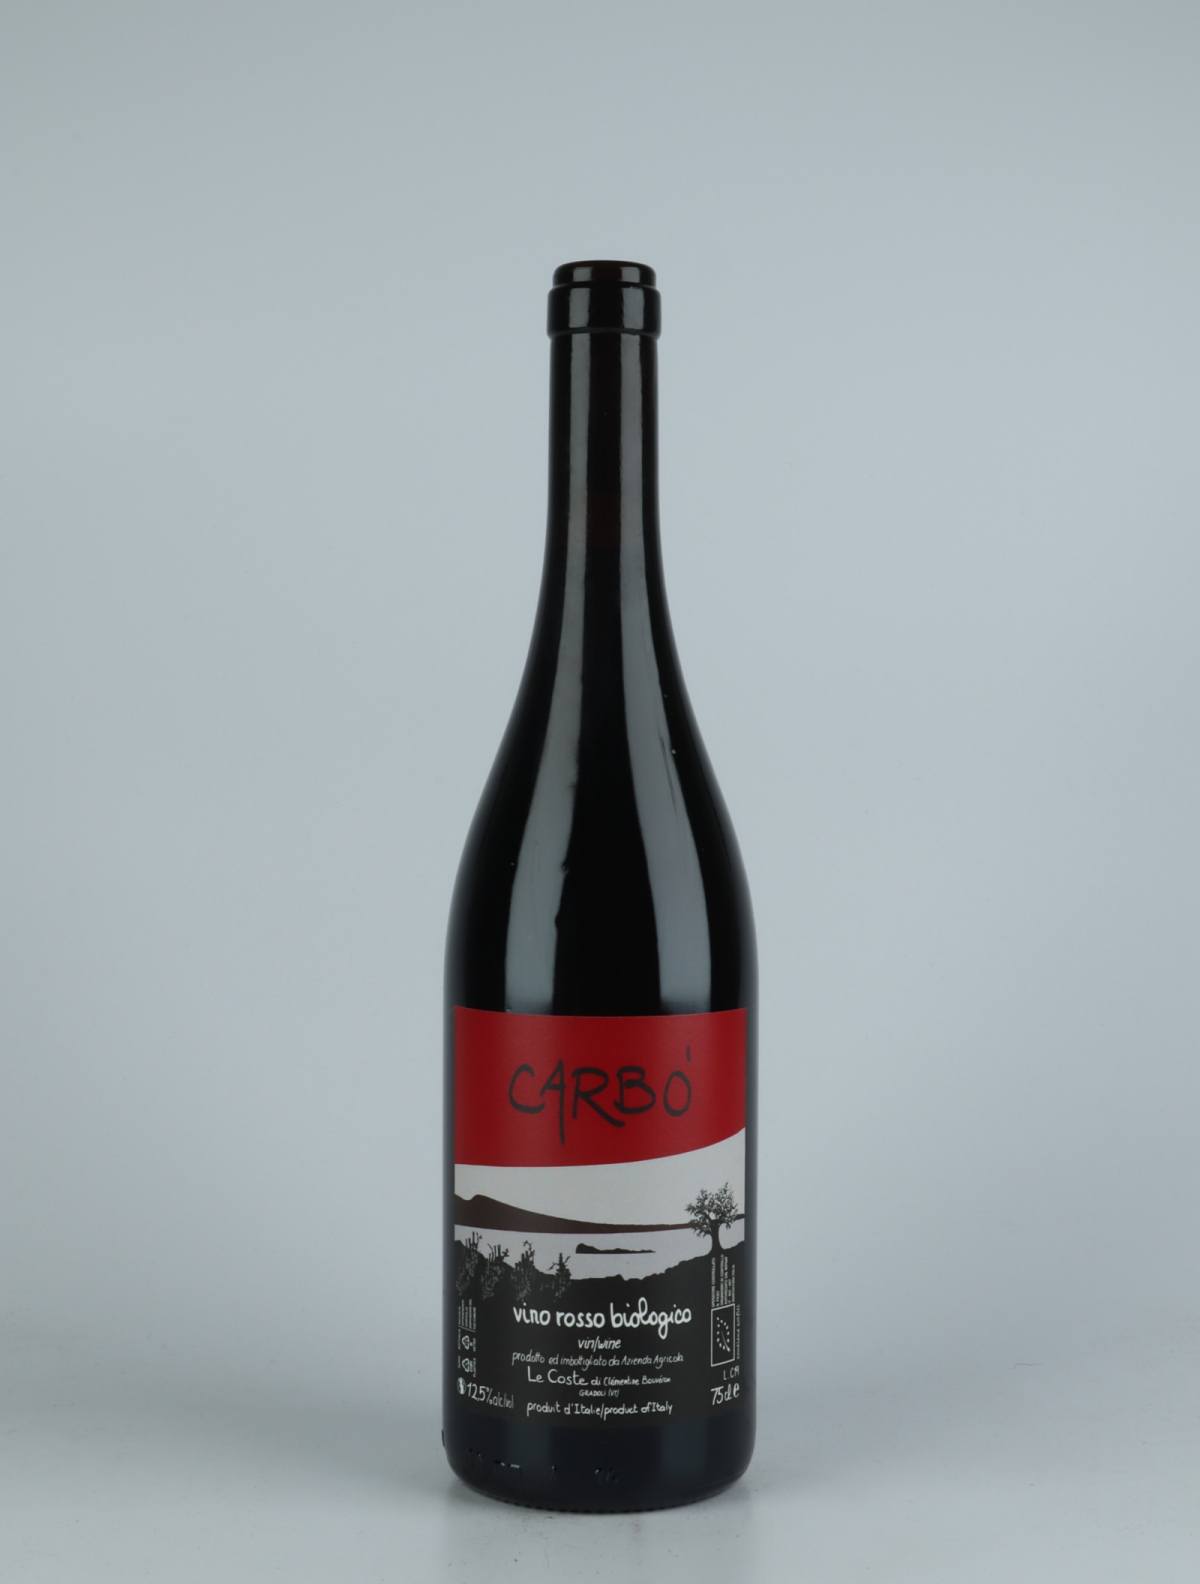 A bottle 2019 Carbò Red wine from Le Coste, Lazio in Italy